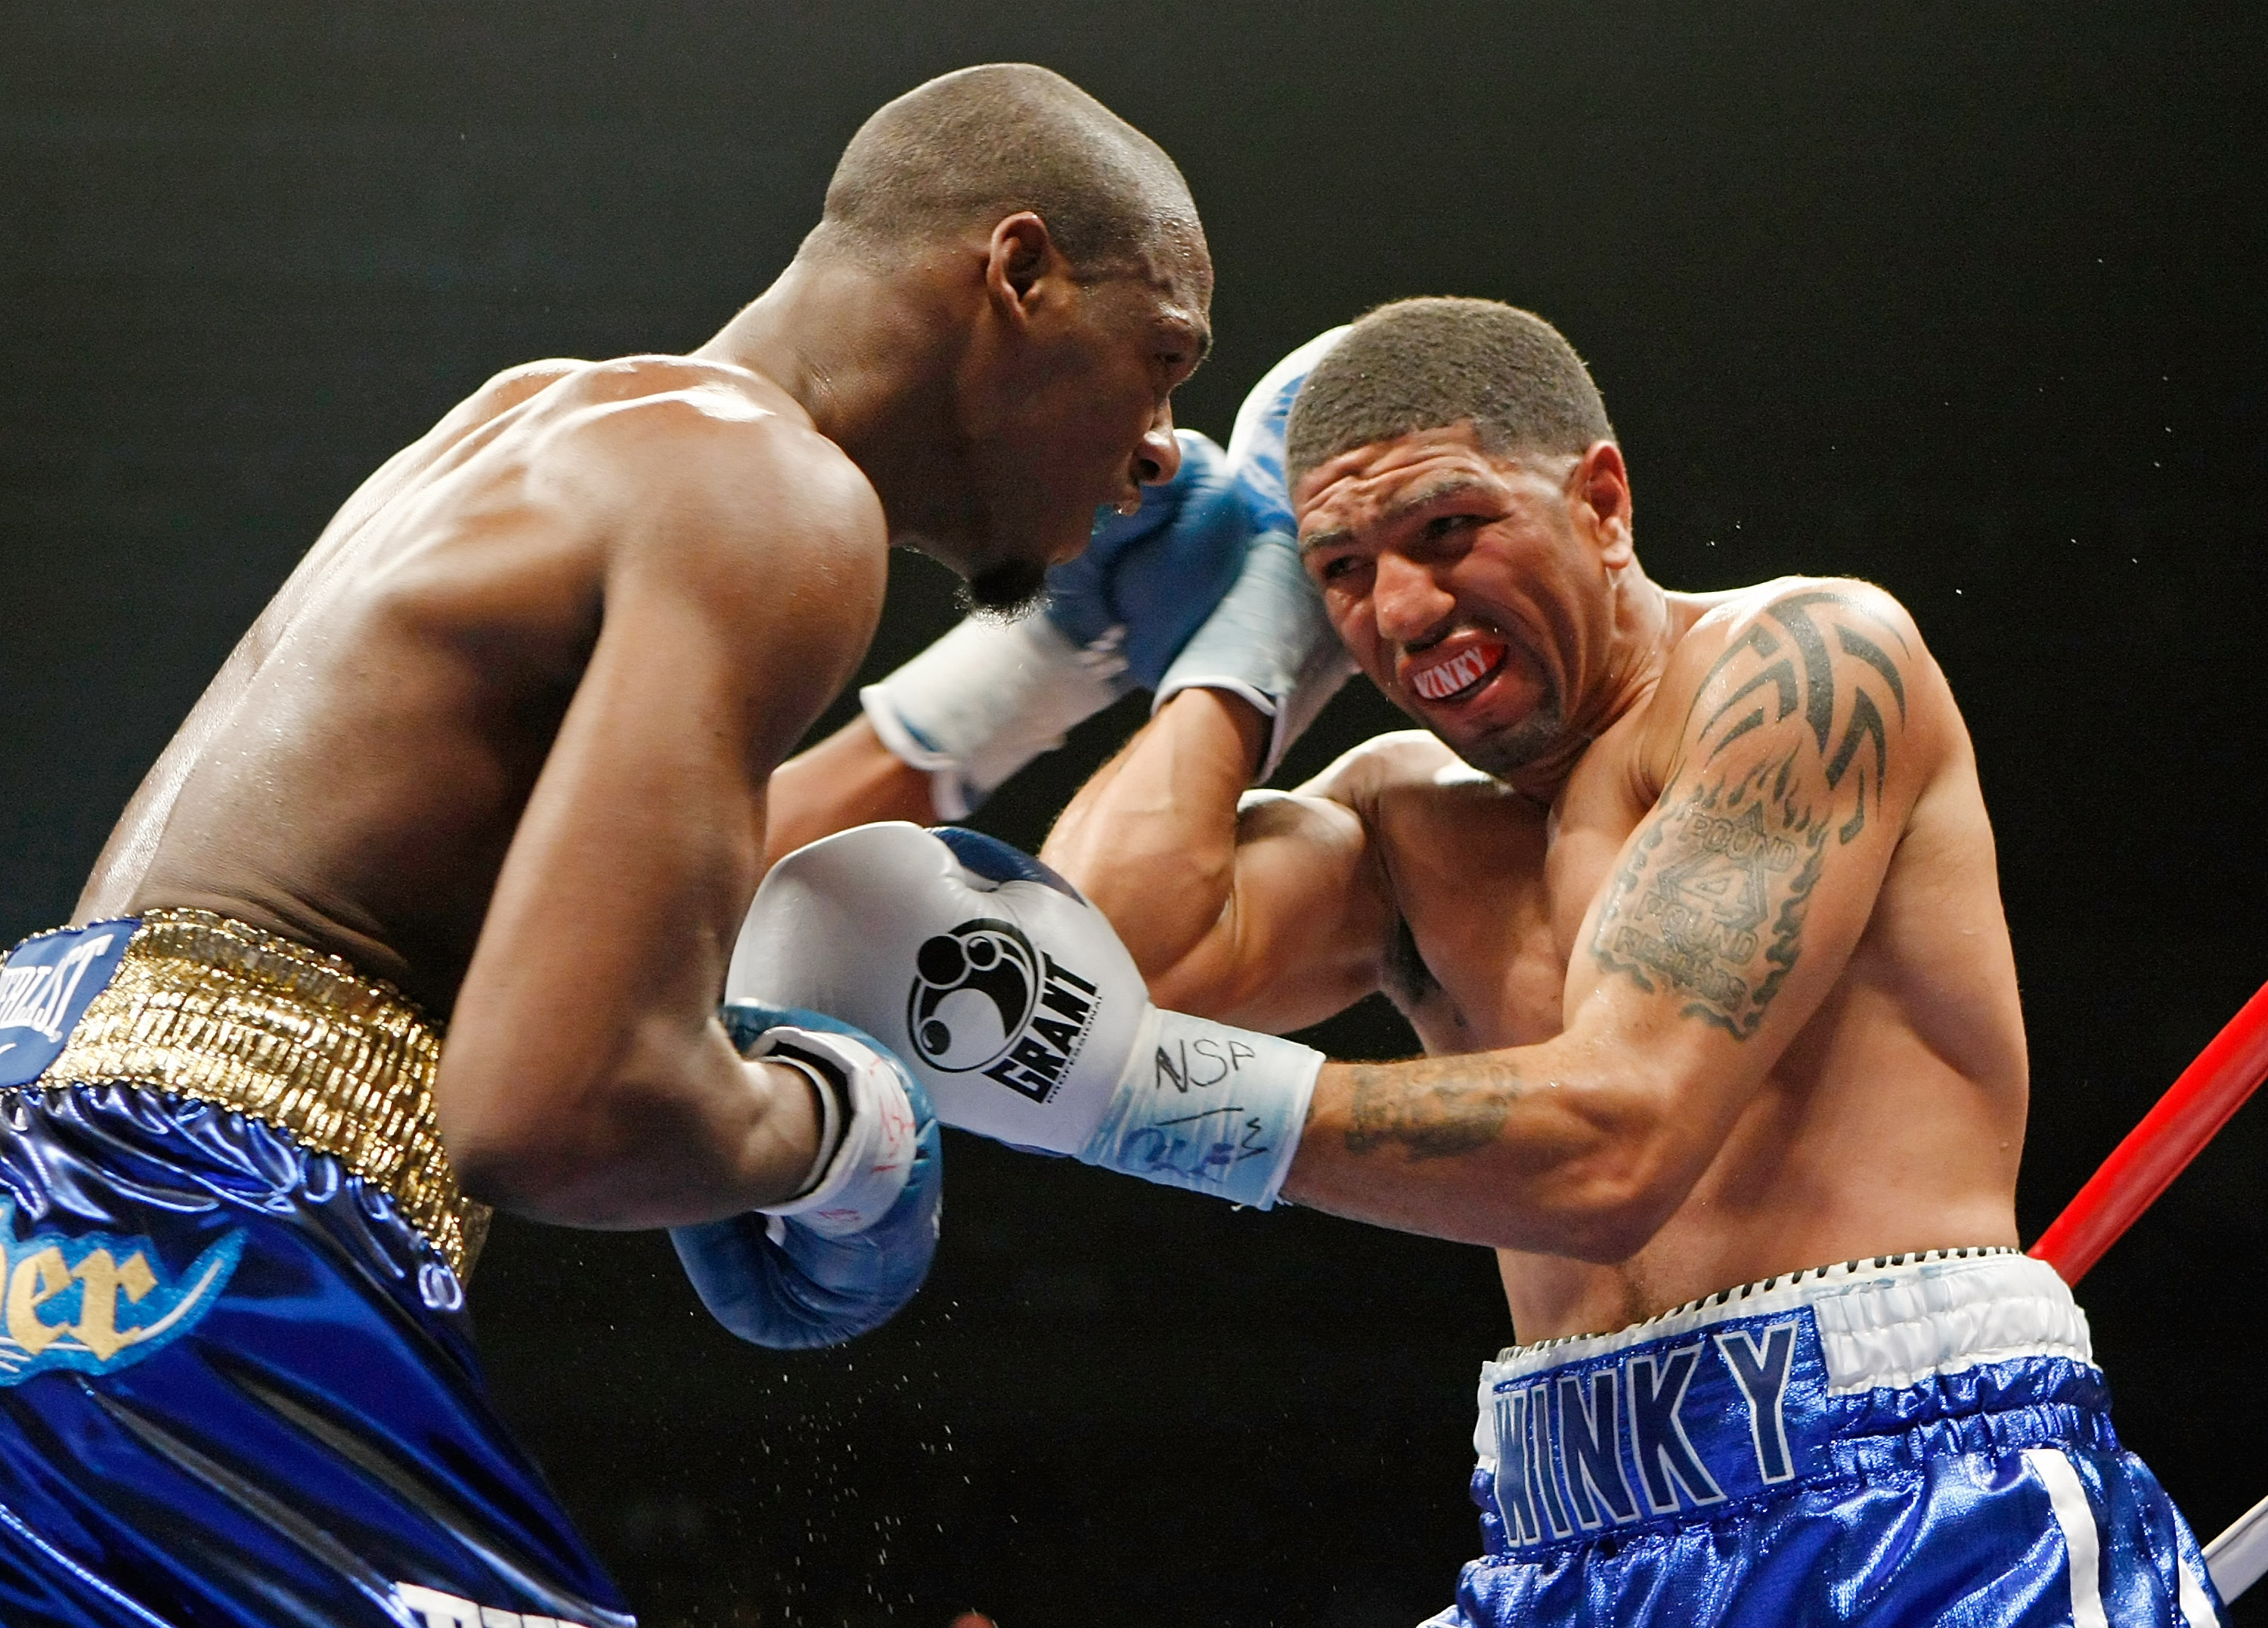 LAS VEGAS - APRIL 11:  Paul Williams (L) and Winky Wright trade blows in the fourth round of their middleweight bout at the Mandalay Bay Events Center April 11, 2009 in Las Vegas, Nevada. Williams won by unanimous decision.  (Photo by Ethan Miller/Getty I